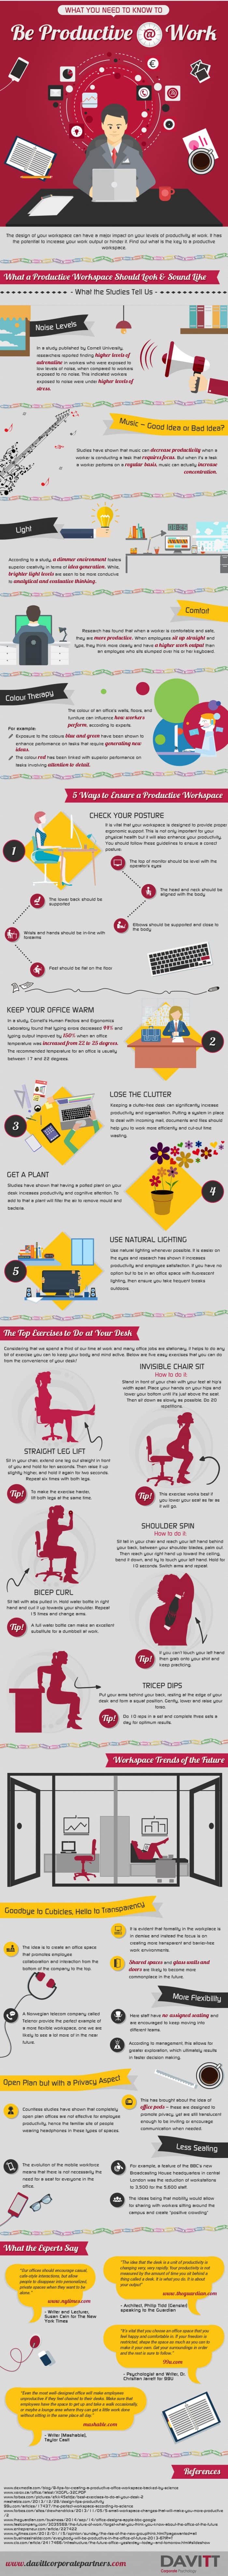 infographic describes How to be productive at work